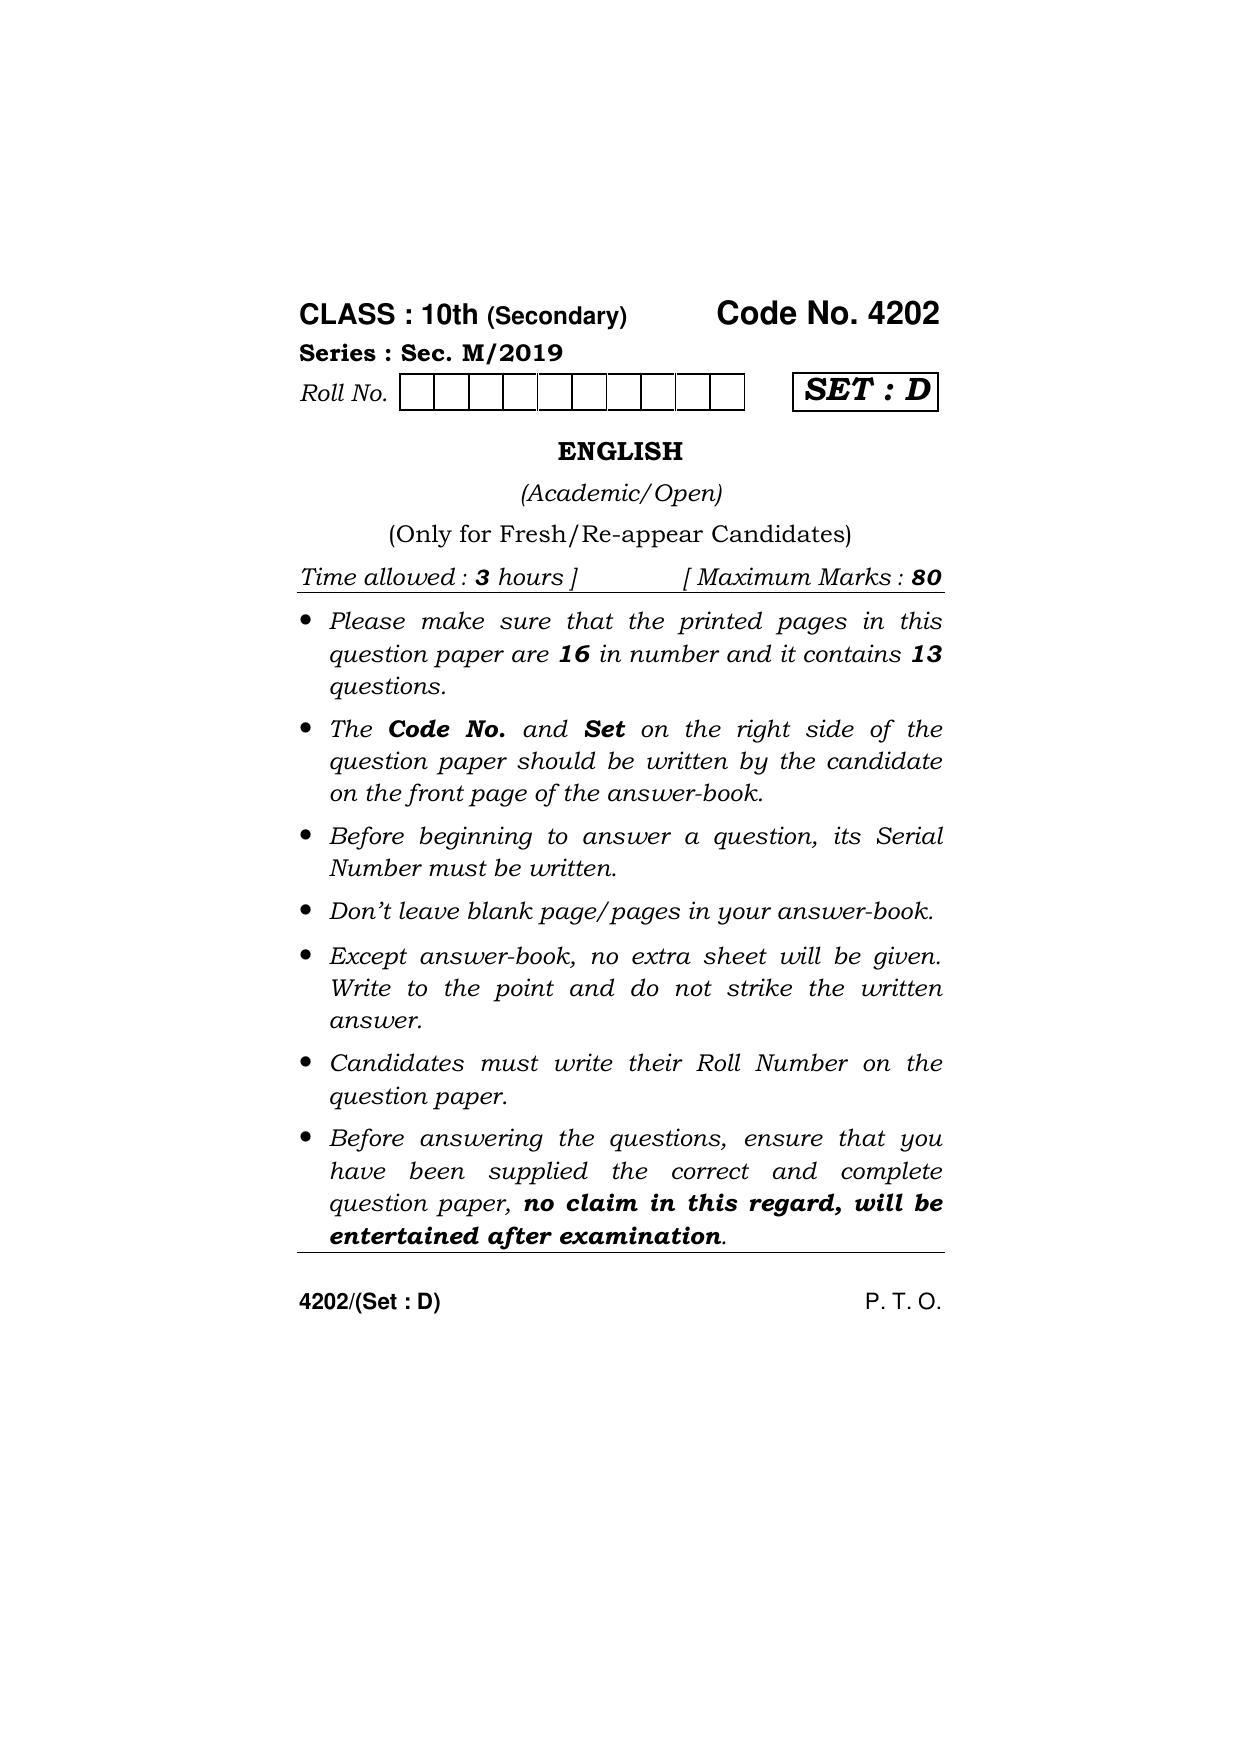 Haryana Board HBSE Class 10 English (All Set) 2019 Question Paper - Page 49